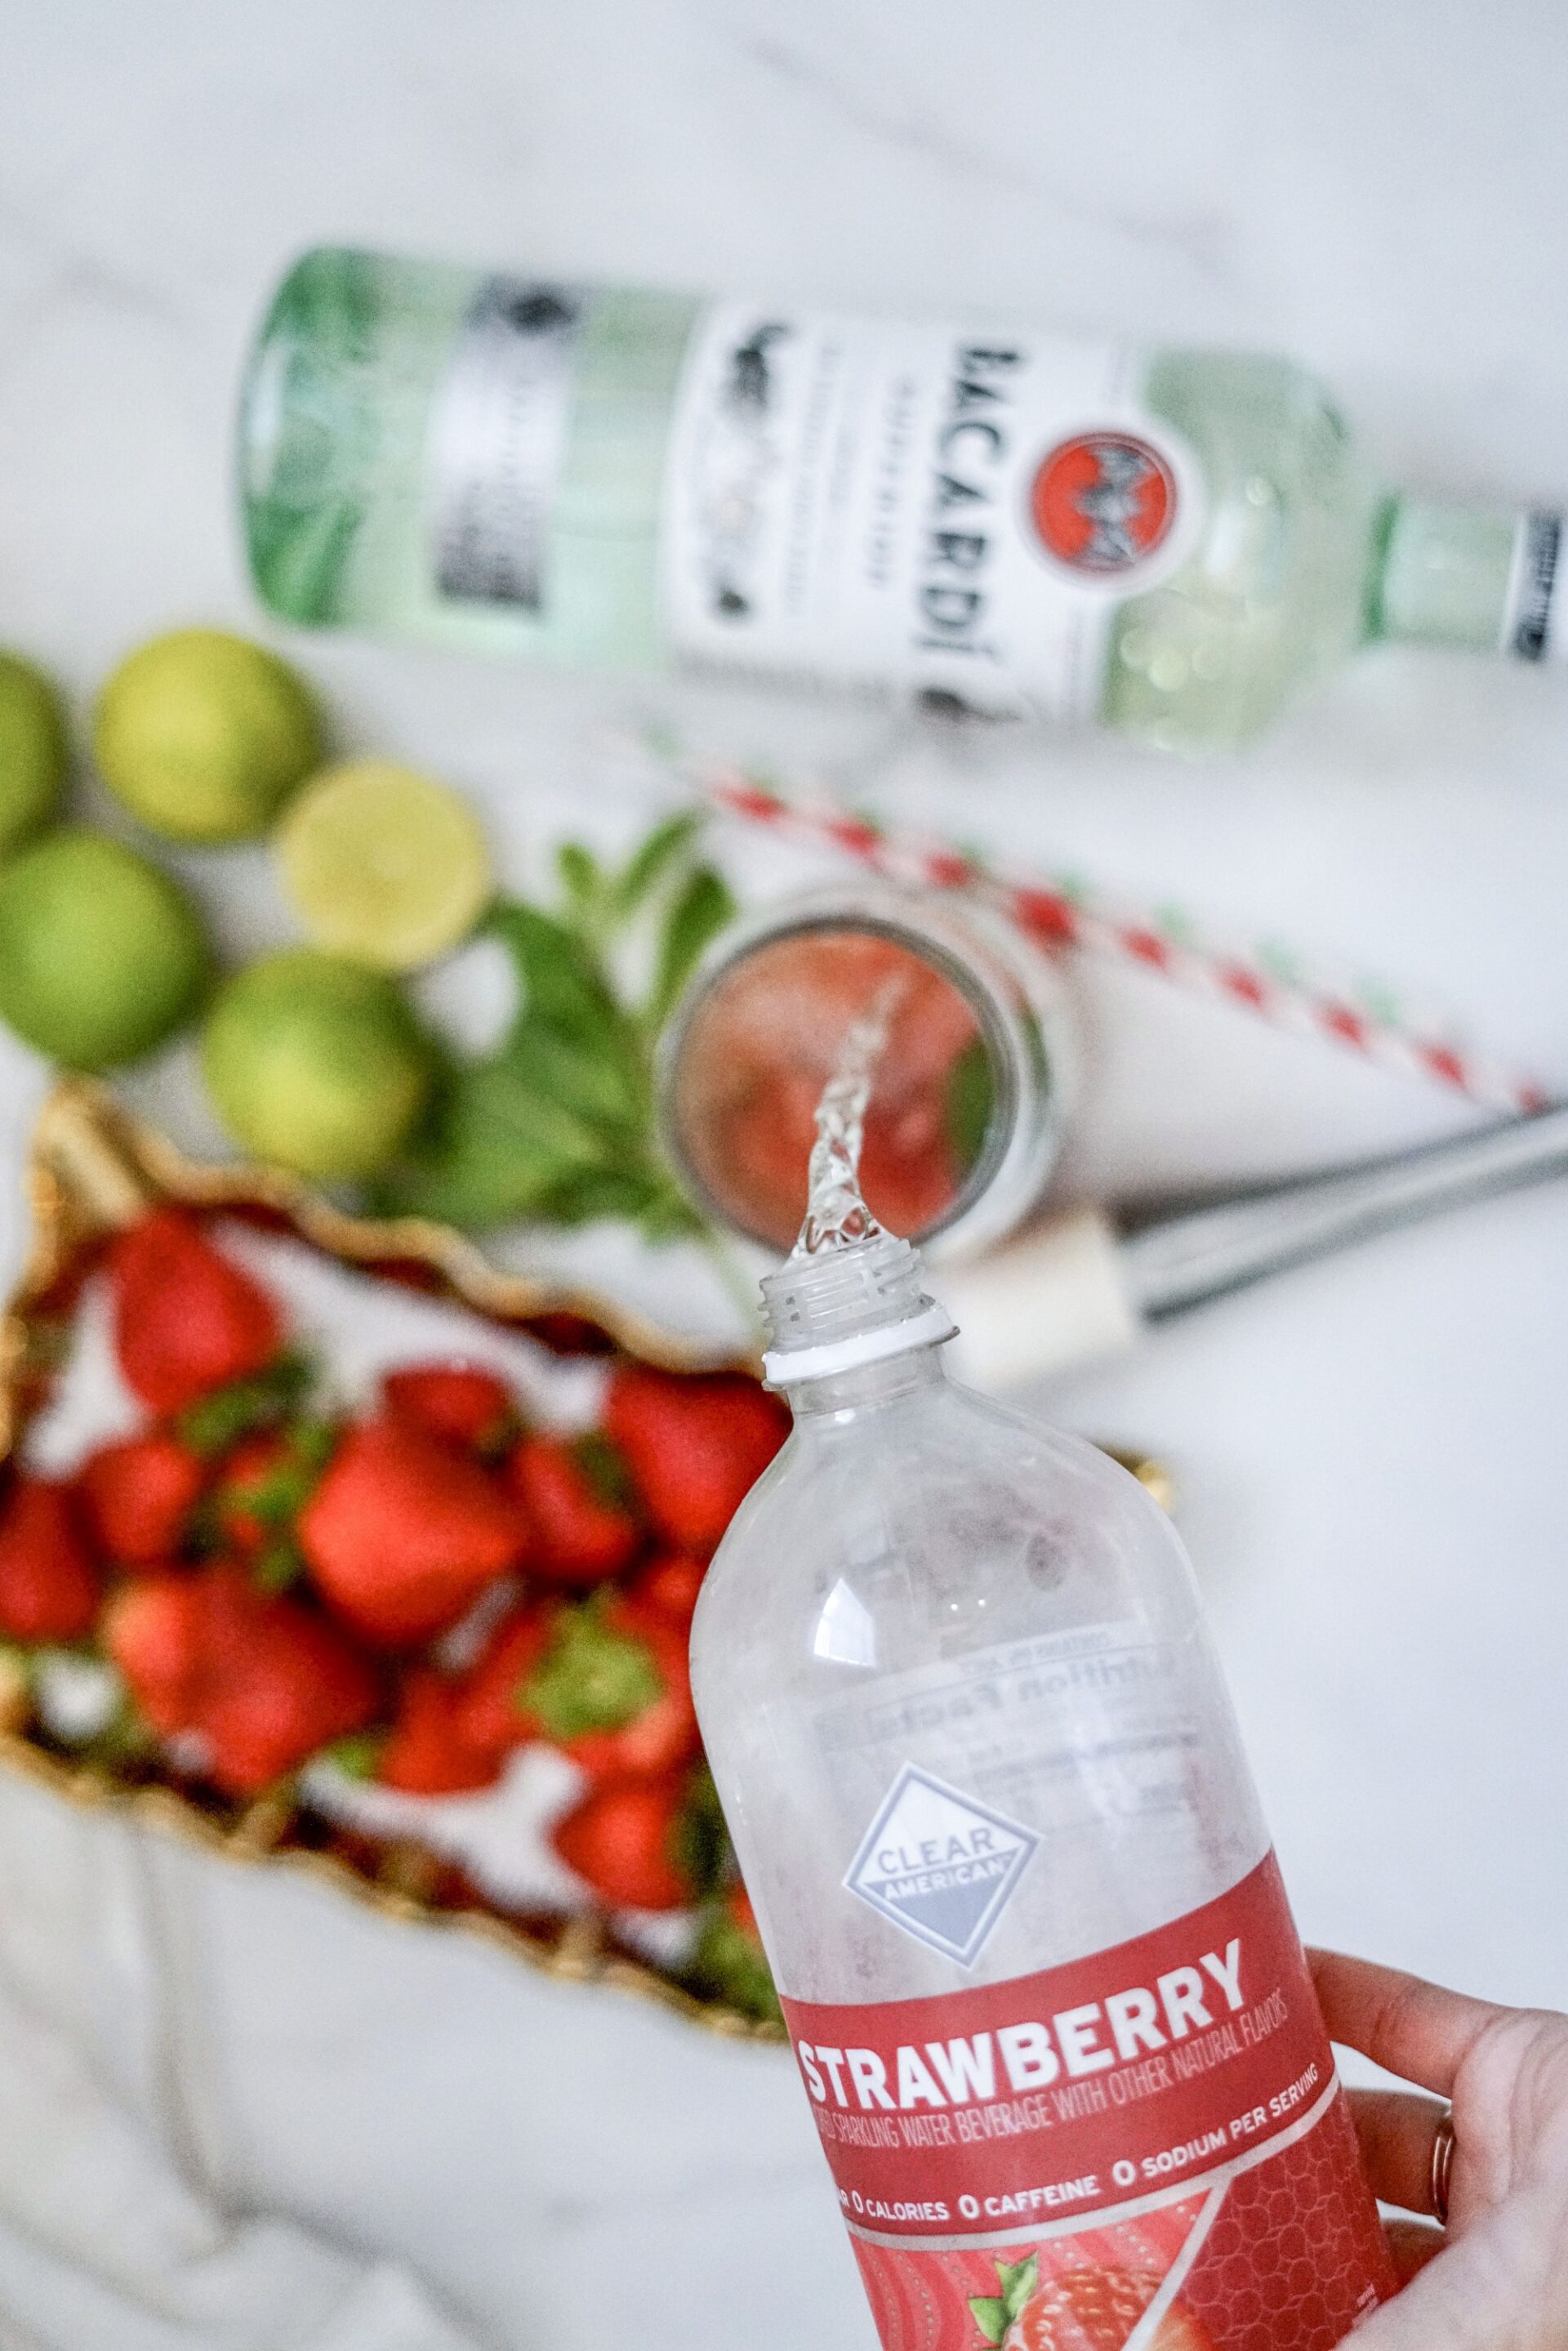 Pouring strawberry sparkling water into a glass.